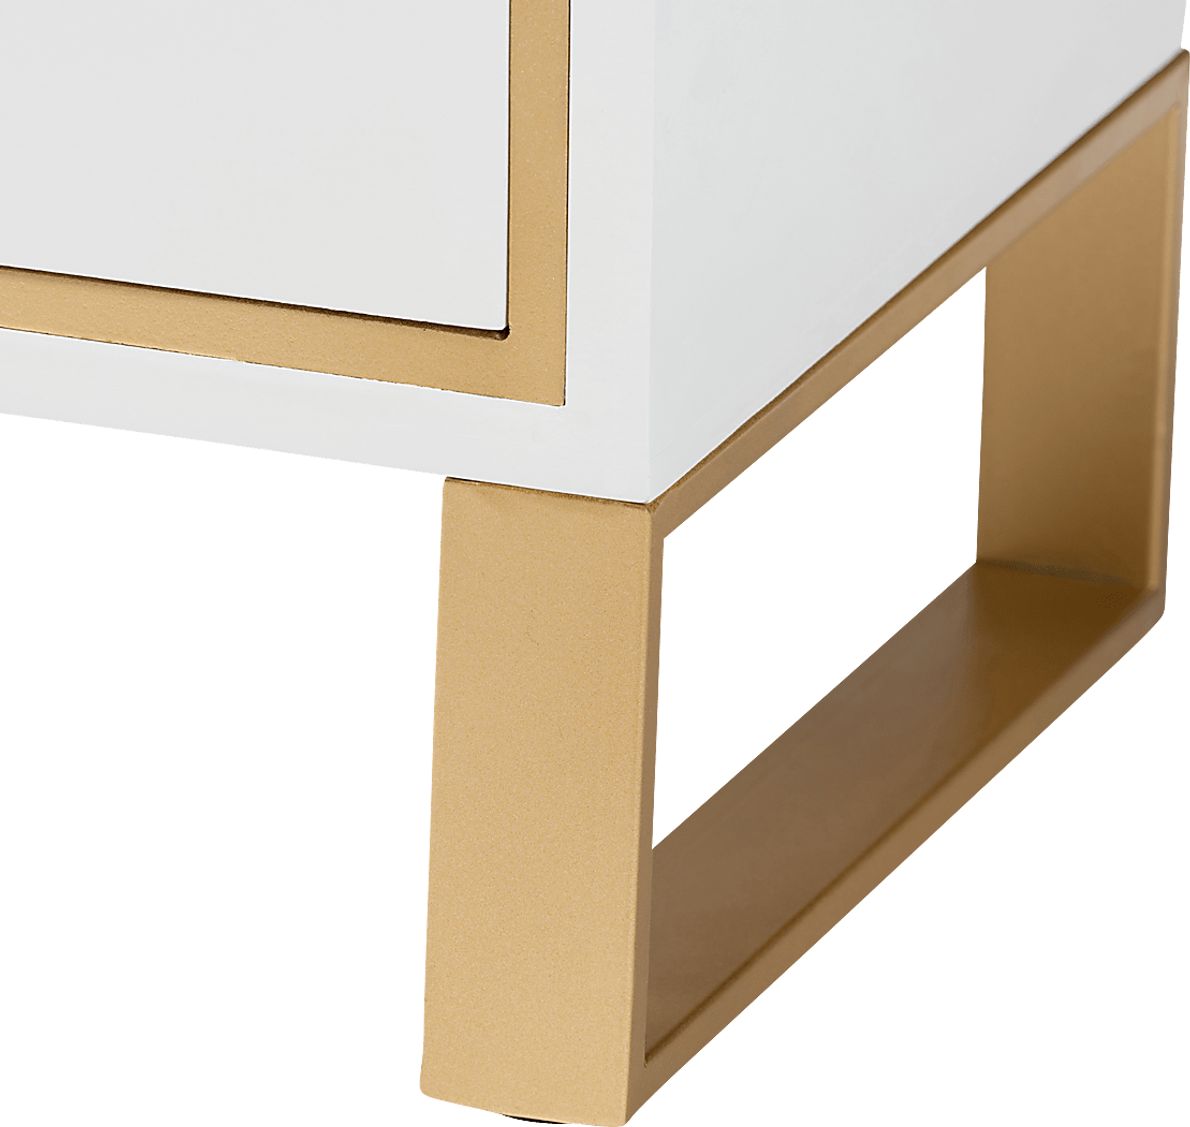 Coveyrise White Nightstand